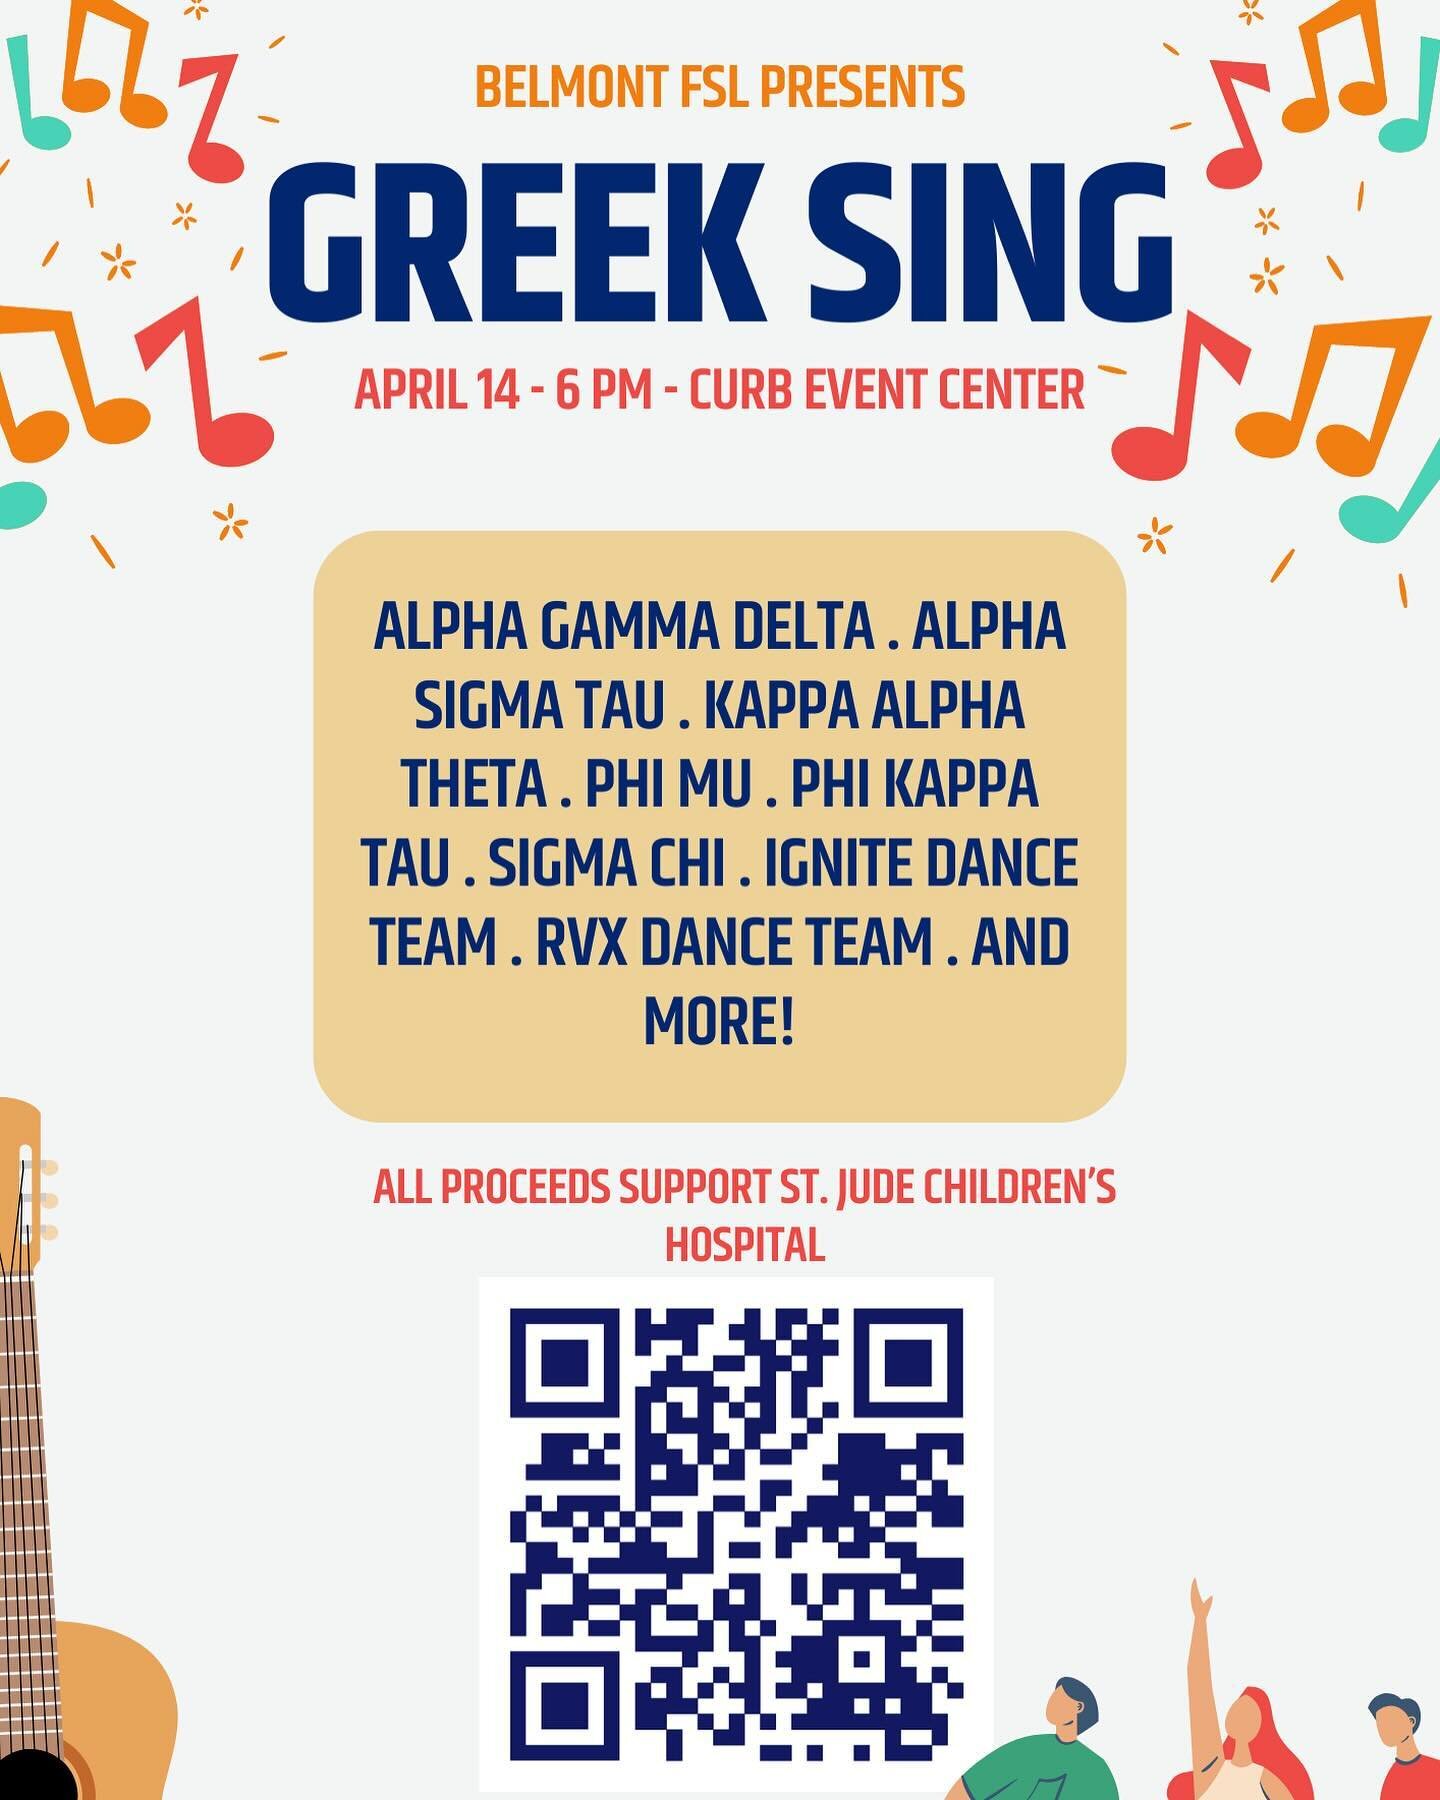 Join us on April 14th as the FSL community competes in Panhellenic&rsquo;s annual Greek Sing!! 

Link in bio to buy tickets and donate to St. Jude Children&rsquo;s Research Hospital!